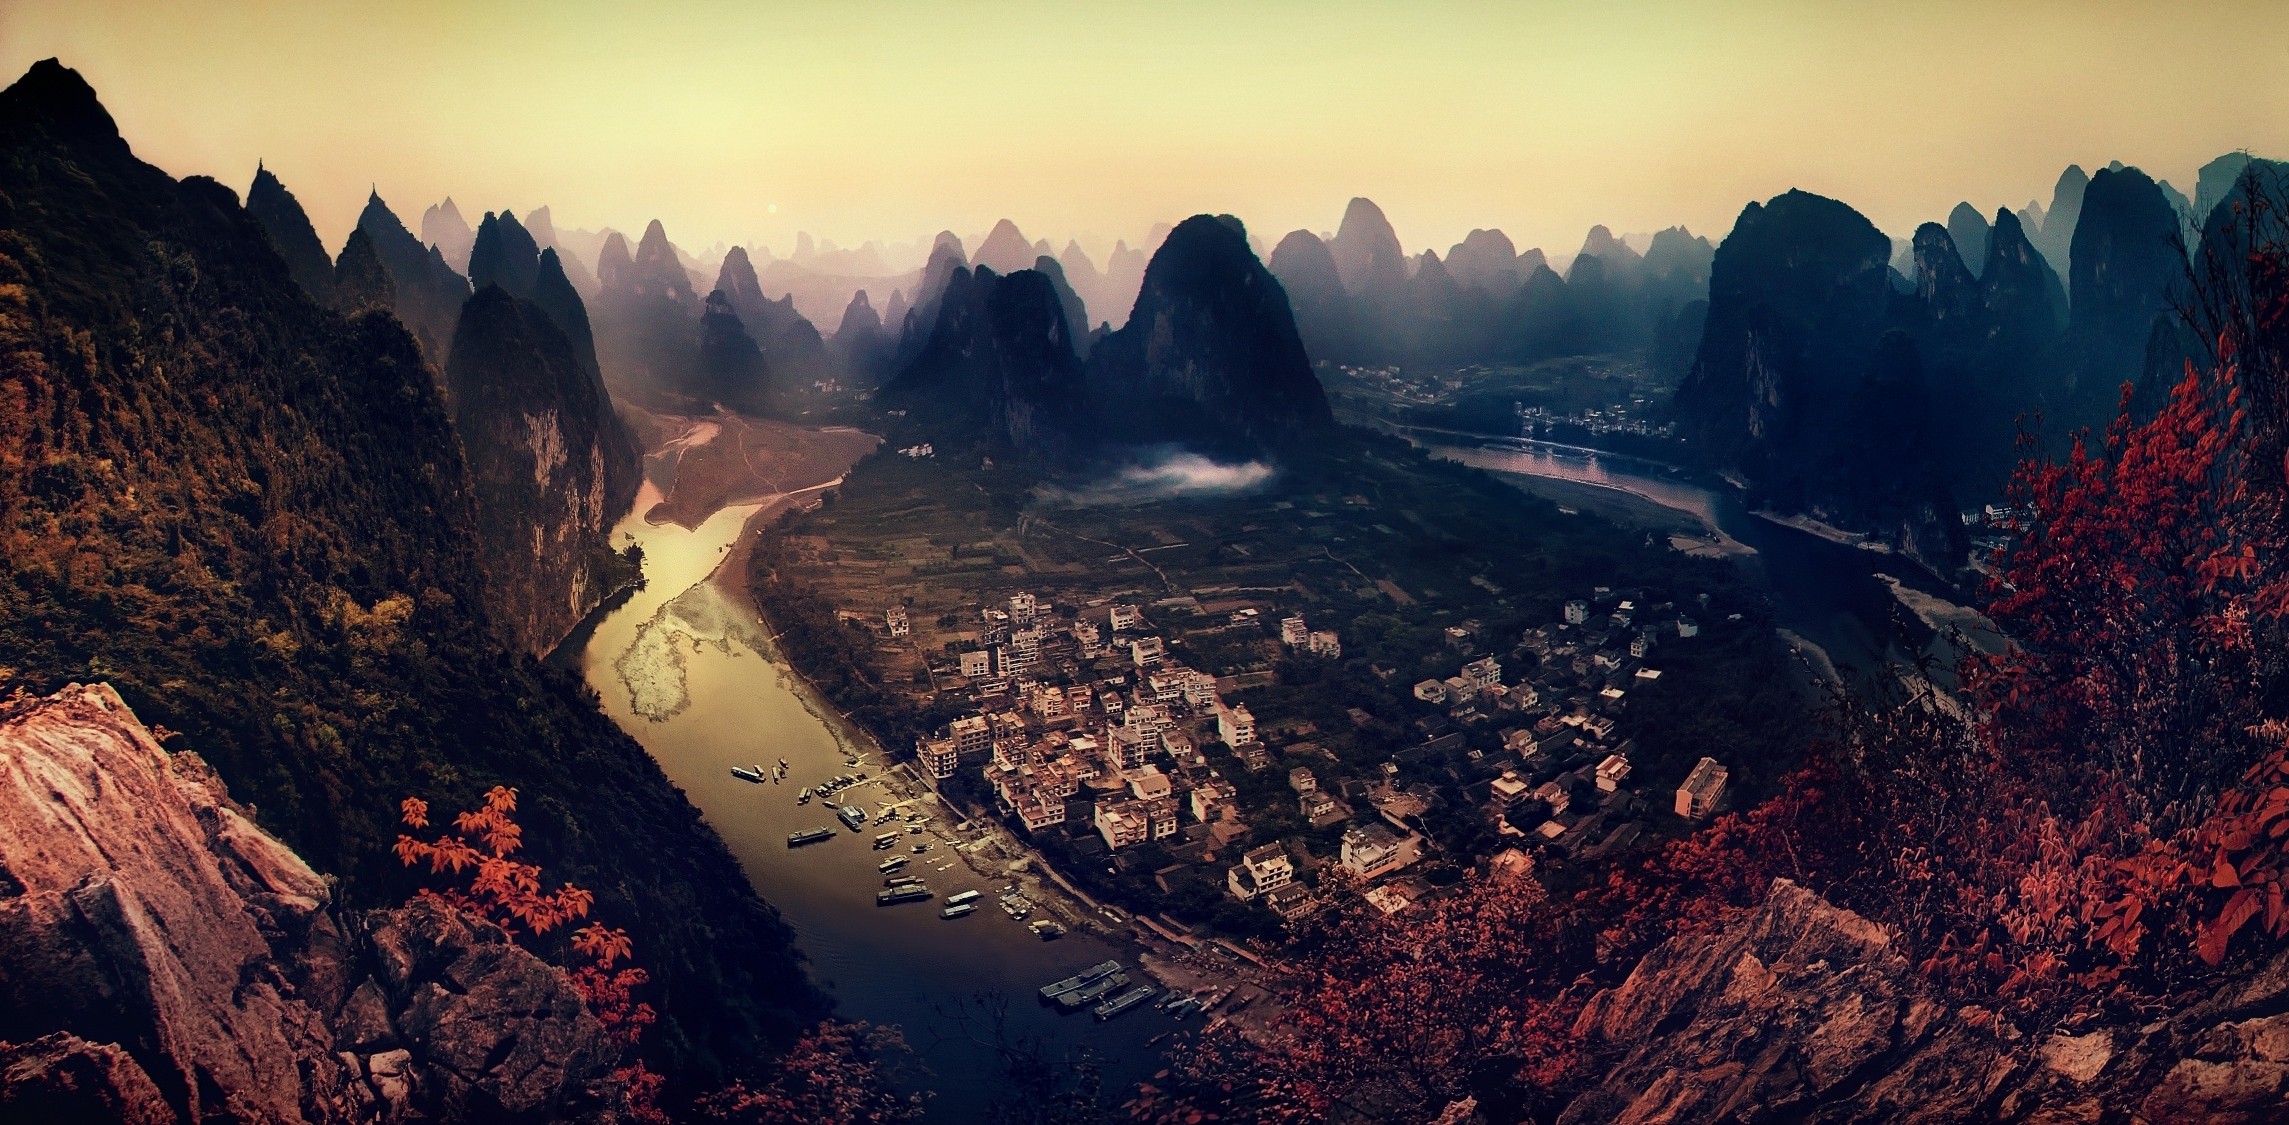 Mountains Cityscape River Fall Field Forest Mist Sunset China Building Nature Panoramas Landscape 2289x1125